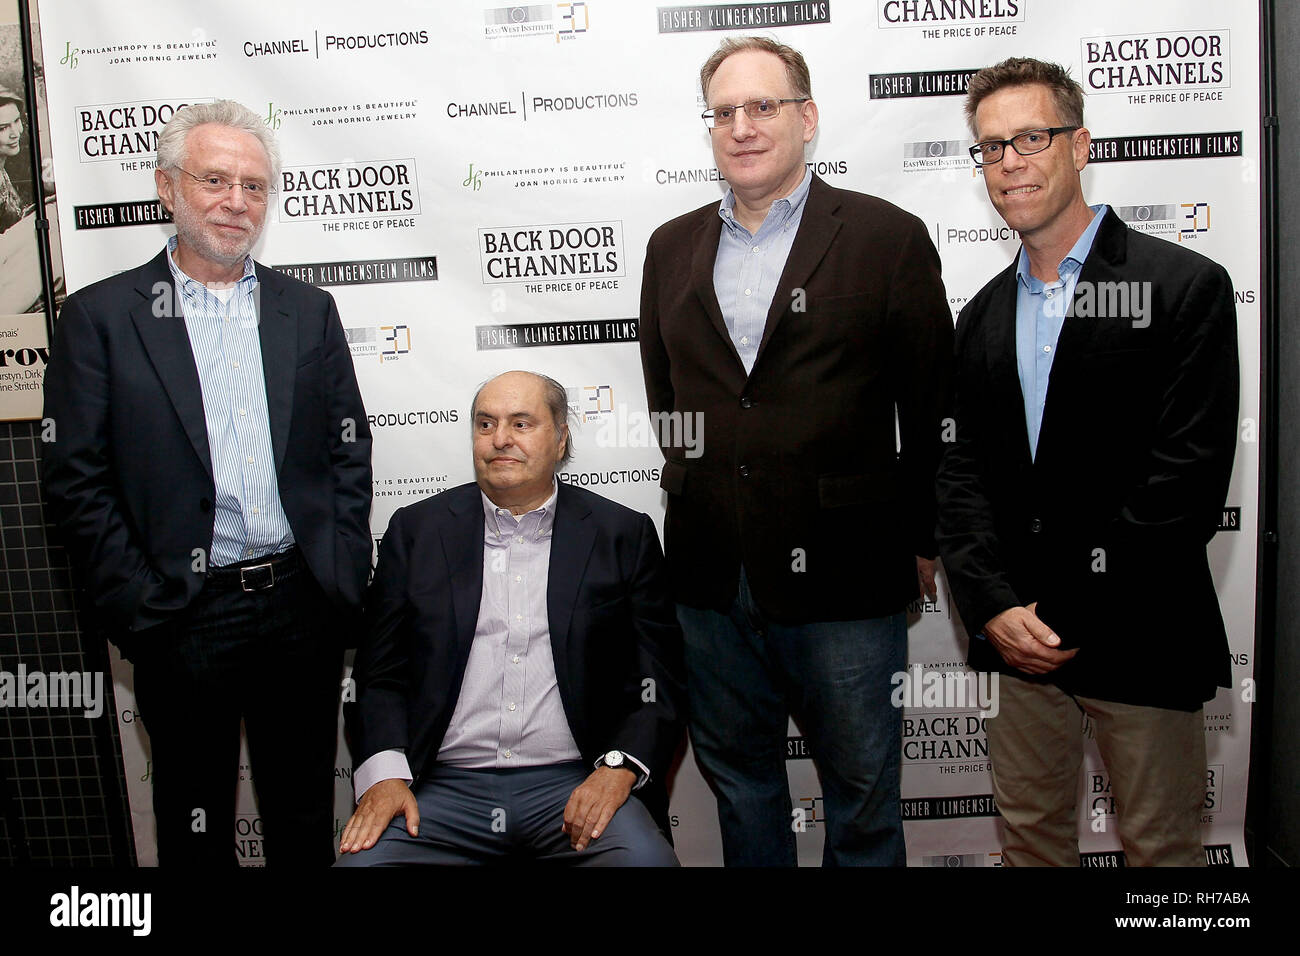 New York, USA. 18 Sep, 2011. Wolf Blitzer, Leon Charney, Danny Fisher, Harry Hunkele at The Sunday, Sep 18, 2011 Screening Of Film 'Back Door Channel: The Price Of Peace' at Quad Cinema in New York, USA. Credit: Steve Mack/S.D. Mack Pictures/Alamy Stock Photo